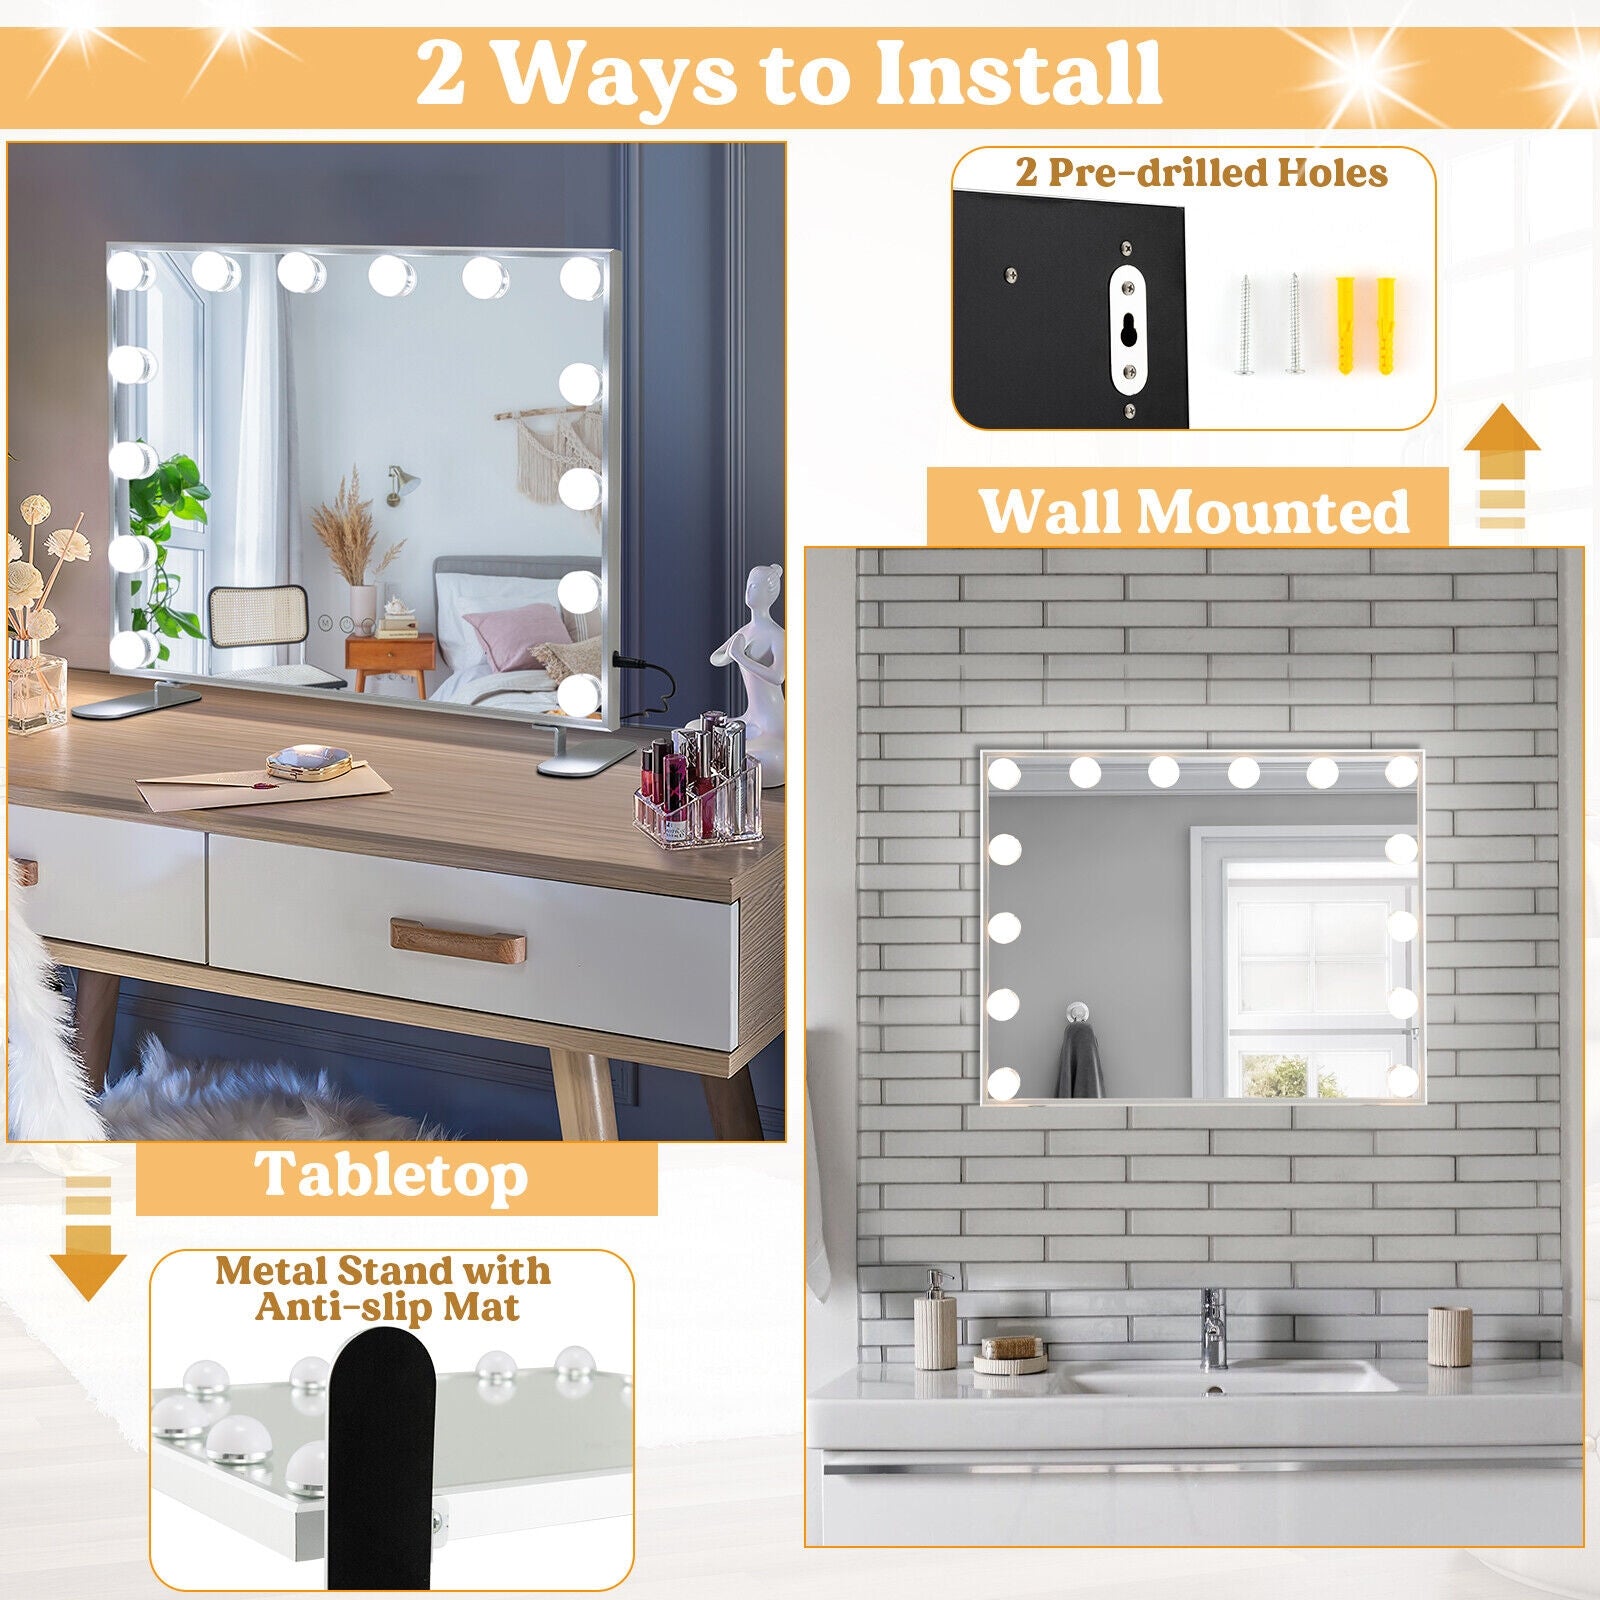 2-in-1 Vanity Mirror with 14 Dimmable LED Bulbs, Silver - Gallery Canada